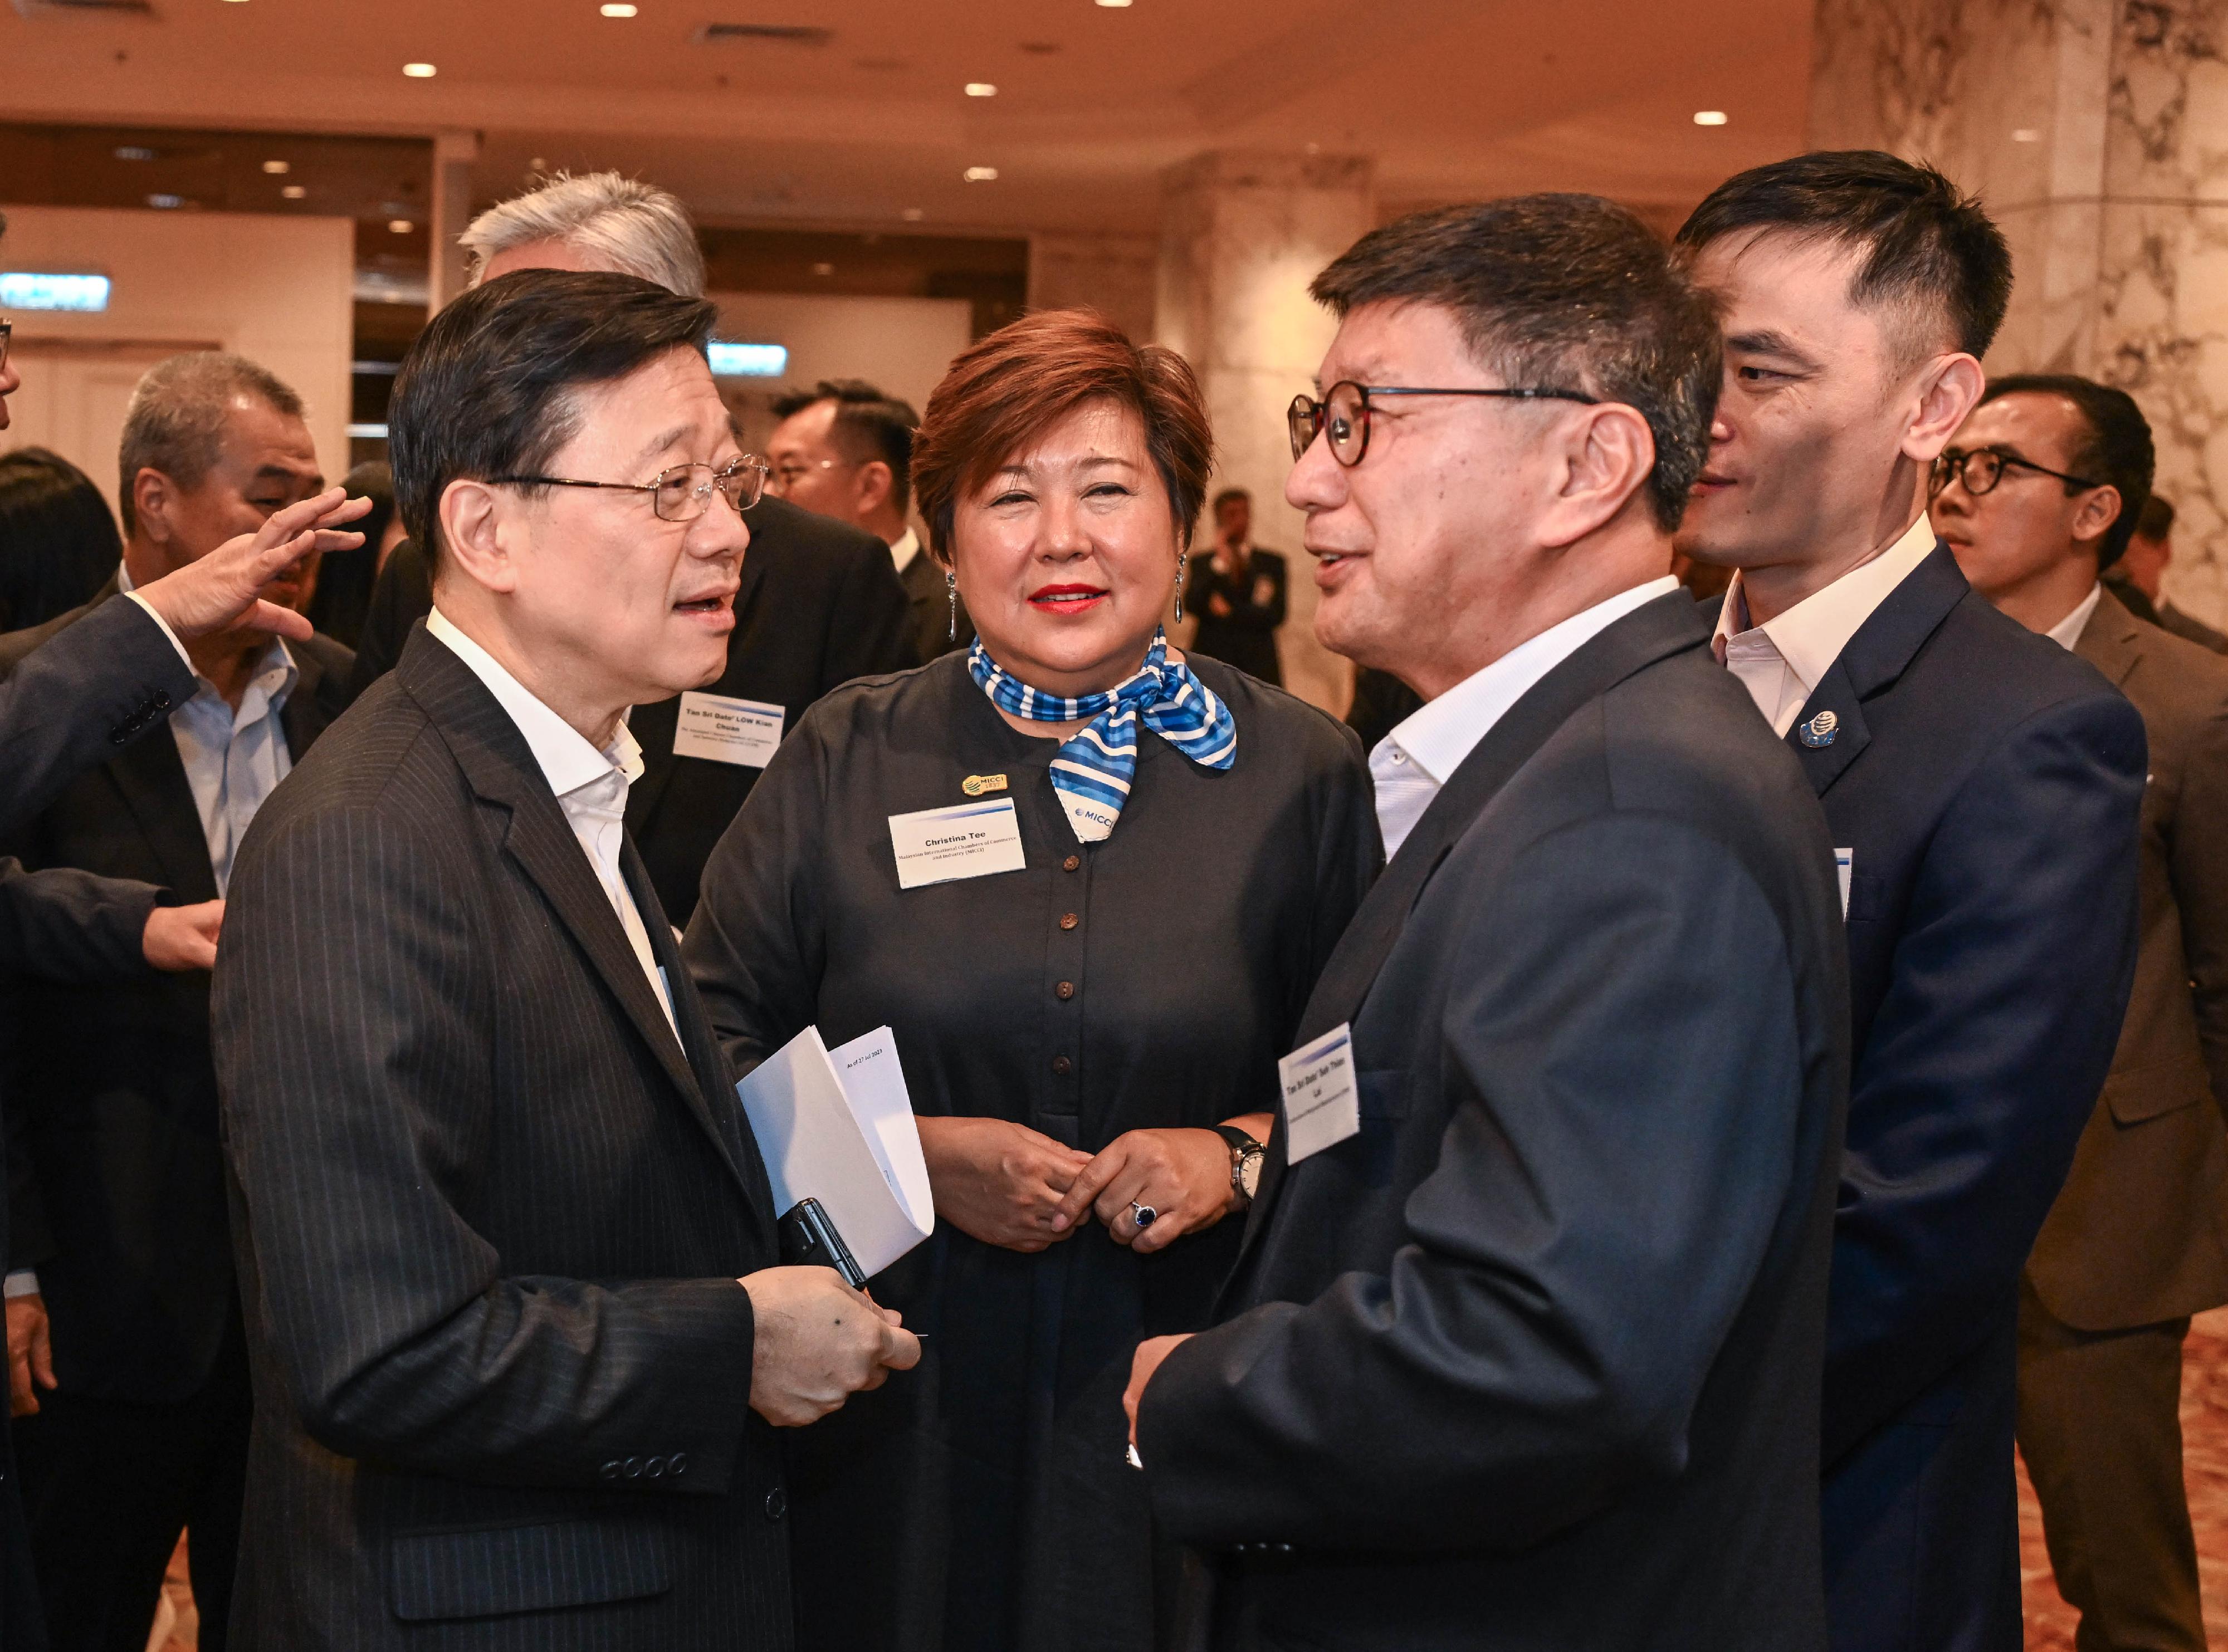 The Chief Exceutive, Mr John Lee, attended a dinner banquet with members of the National Chamber of Commerce and Industry of Malaysia (NCCIM) today (July 27). Photo shows Mr Lee (left) and the President of the NCCIM, Mr Soh Thian Lai (right), are pictured before the dinner.